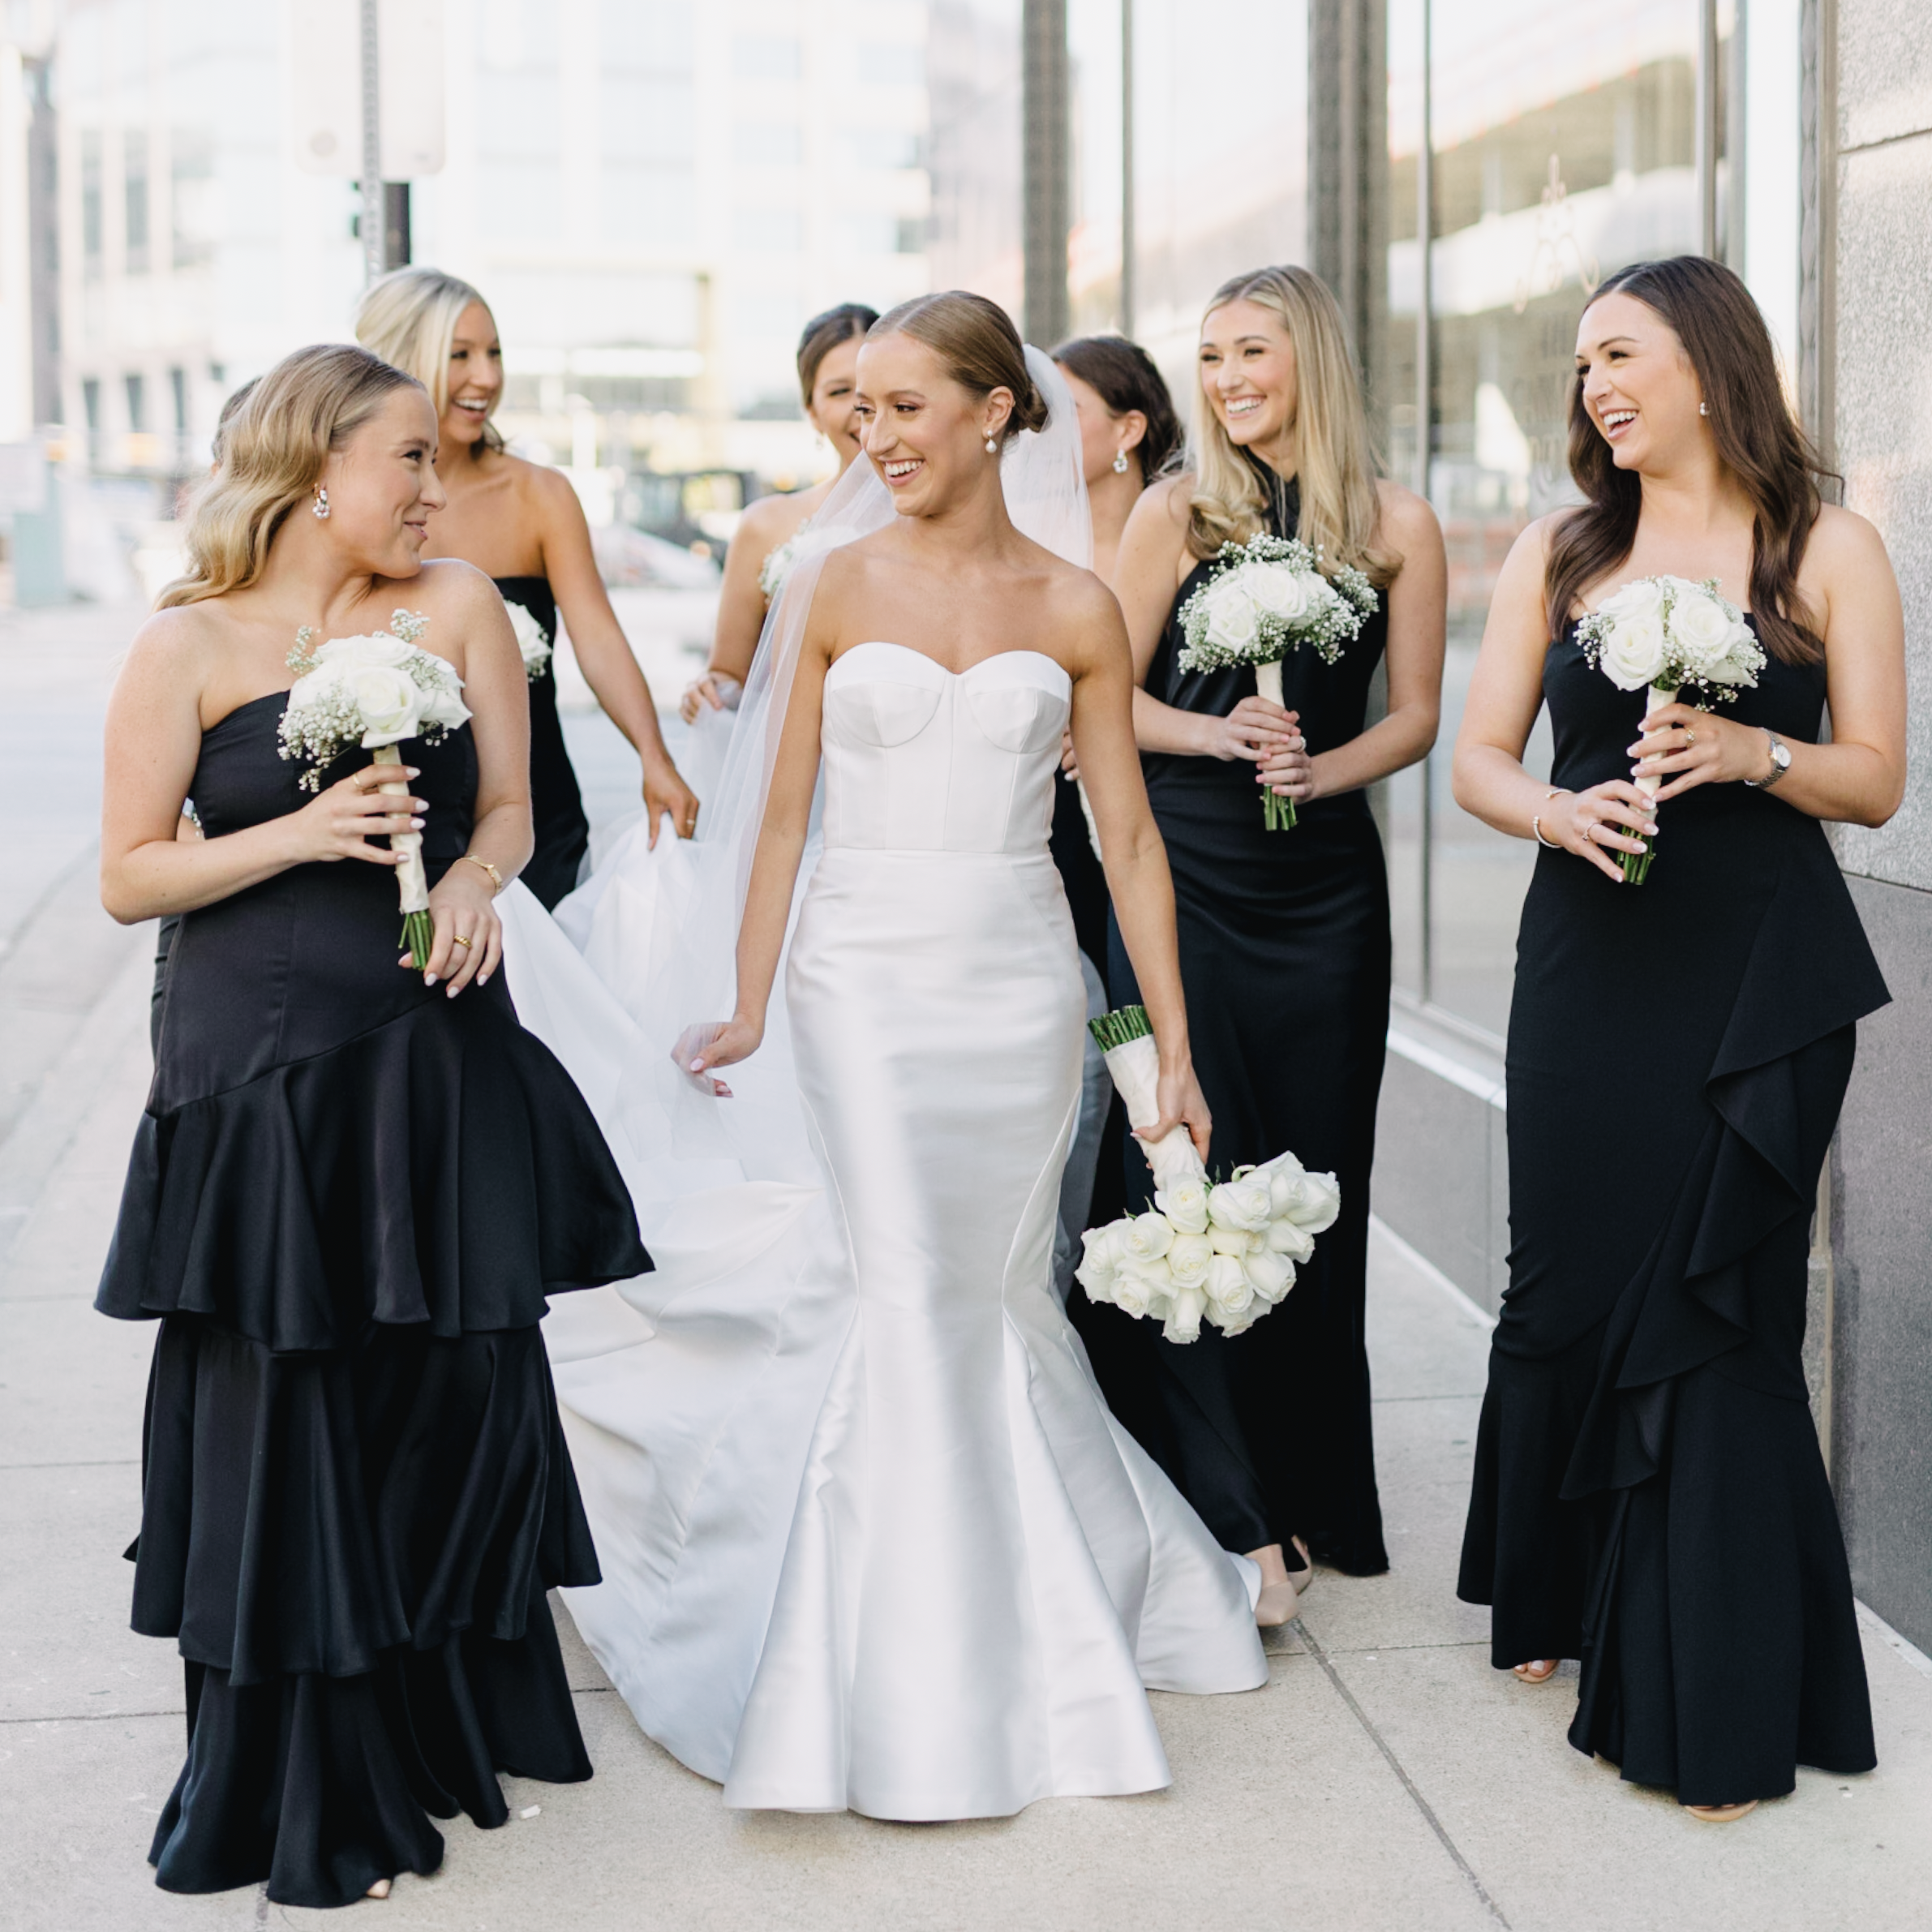 bride and bridesmaids with black dresses and bouquets